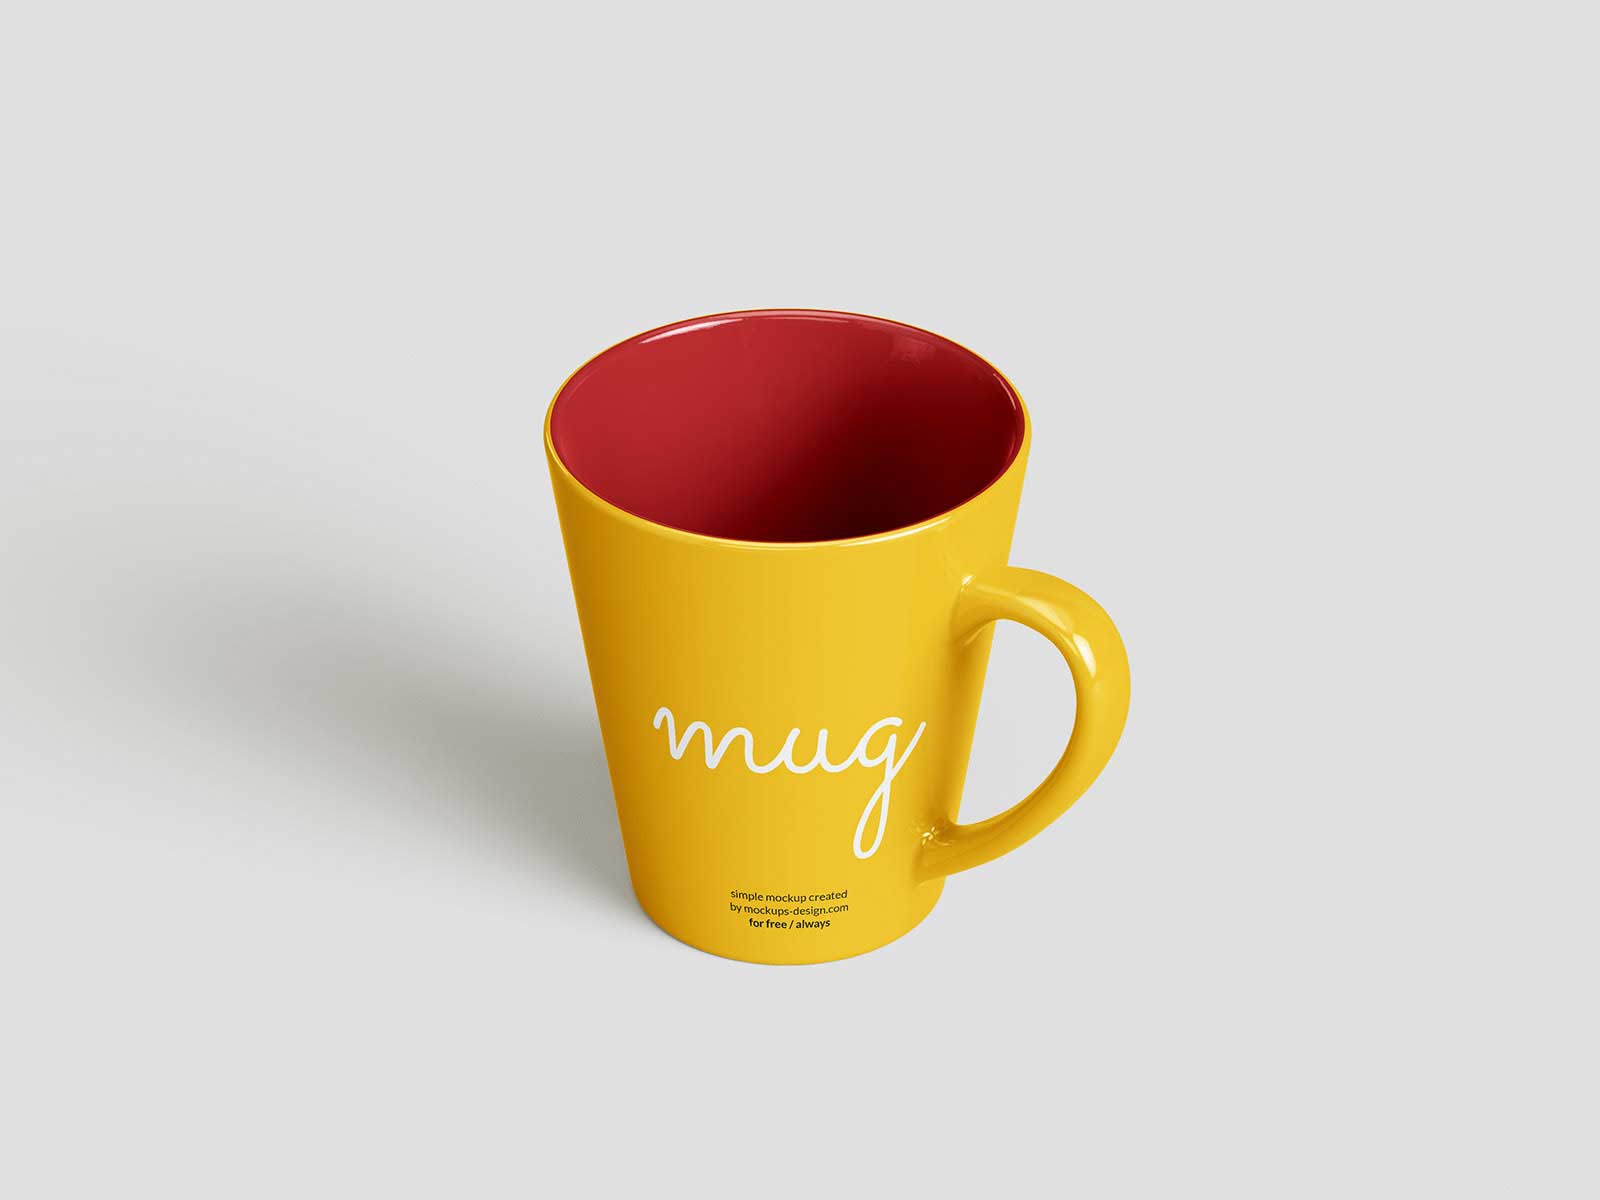 Free Mug Mockup: Elevate Your Style with Endless Design Possibilities